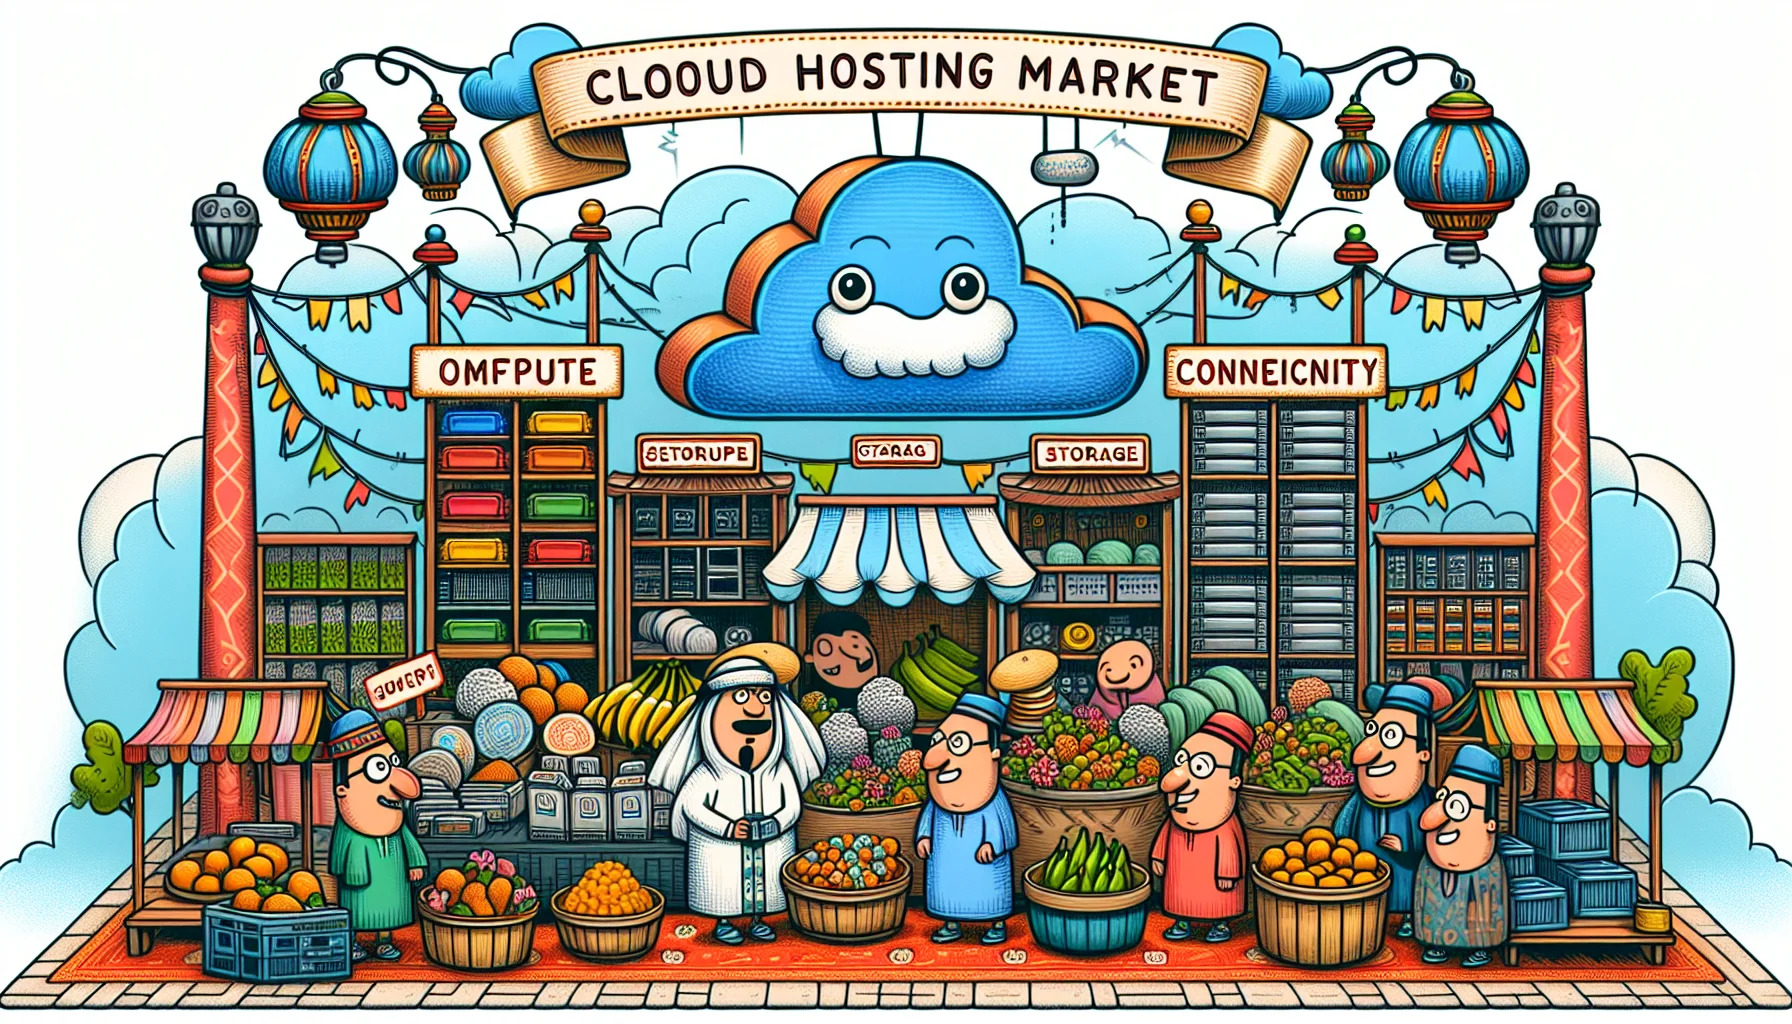 Generate a whimsical picture depicting a traditional market scene. Let the market stalls be filled with various items that symbolically represent different features of cloud hosting: compute power, storage, and connectivity. Have quirky, cartoon-like characters interacting with the items, expressing their delight or surprise at how affordable and accessible they are. Create a large banner hanging above the market scene that reads 'Cloud Hosting Market: High Quality, Low Prices!' Please make sure to use vibrant colors and engaging details to make the image enthralling and enticing.